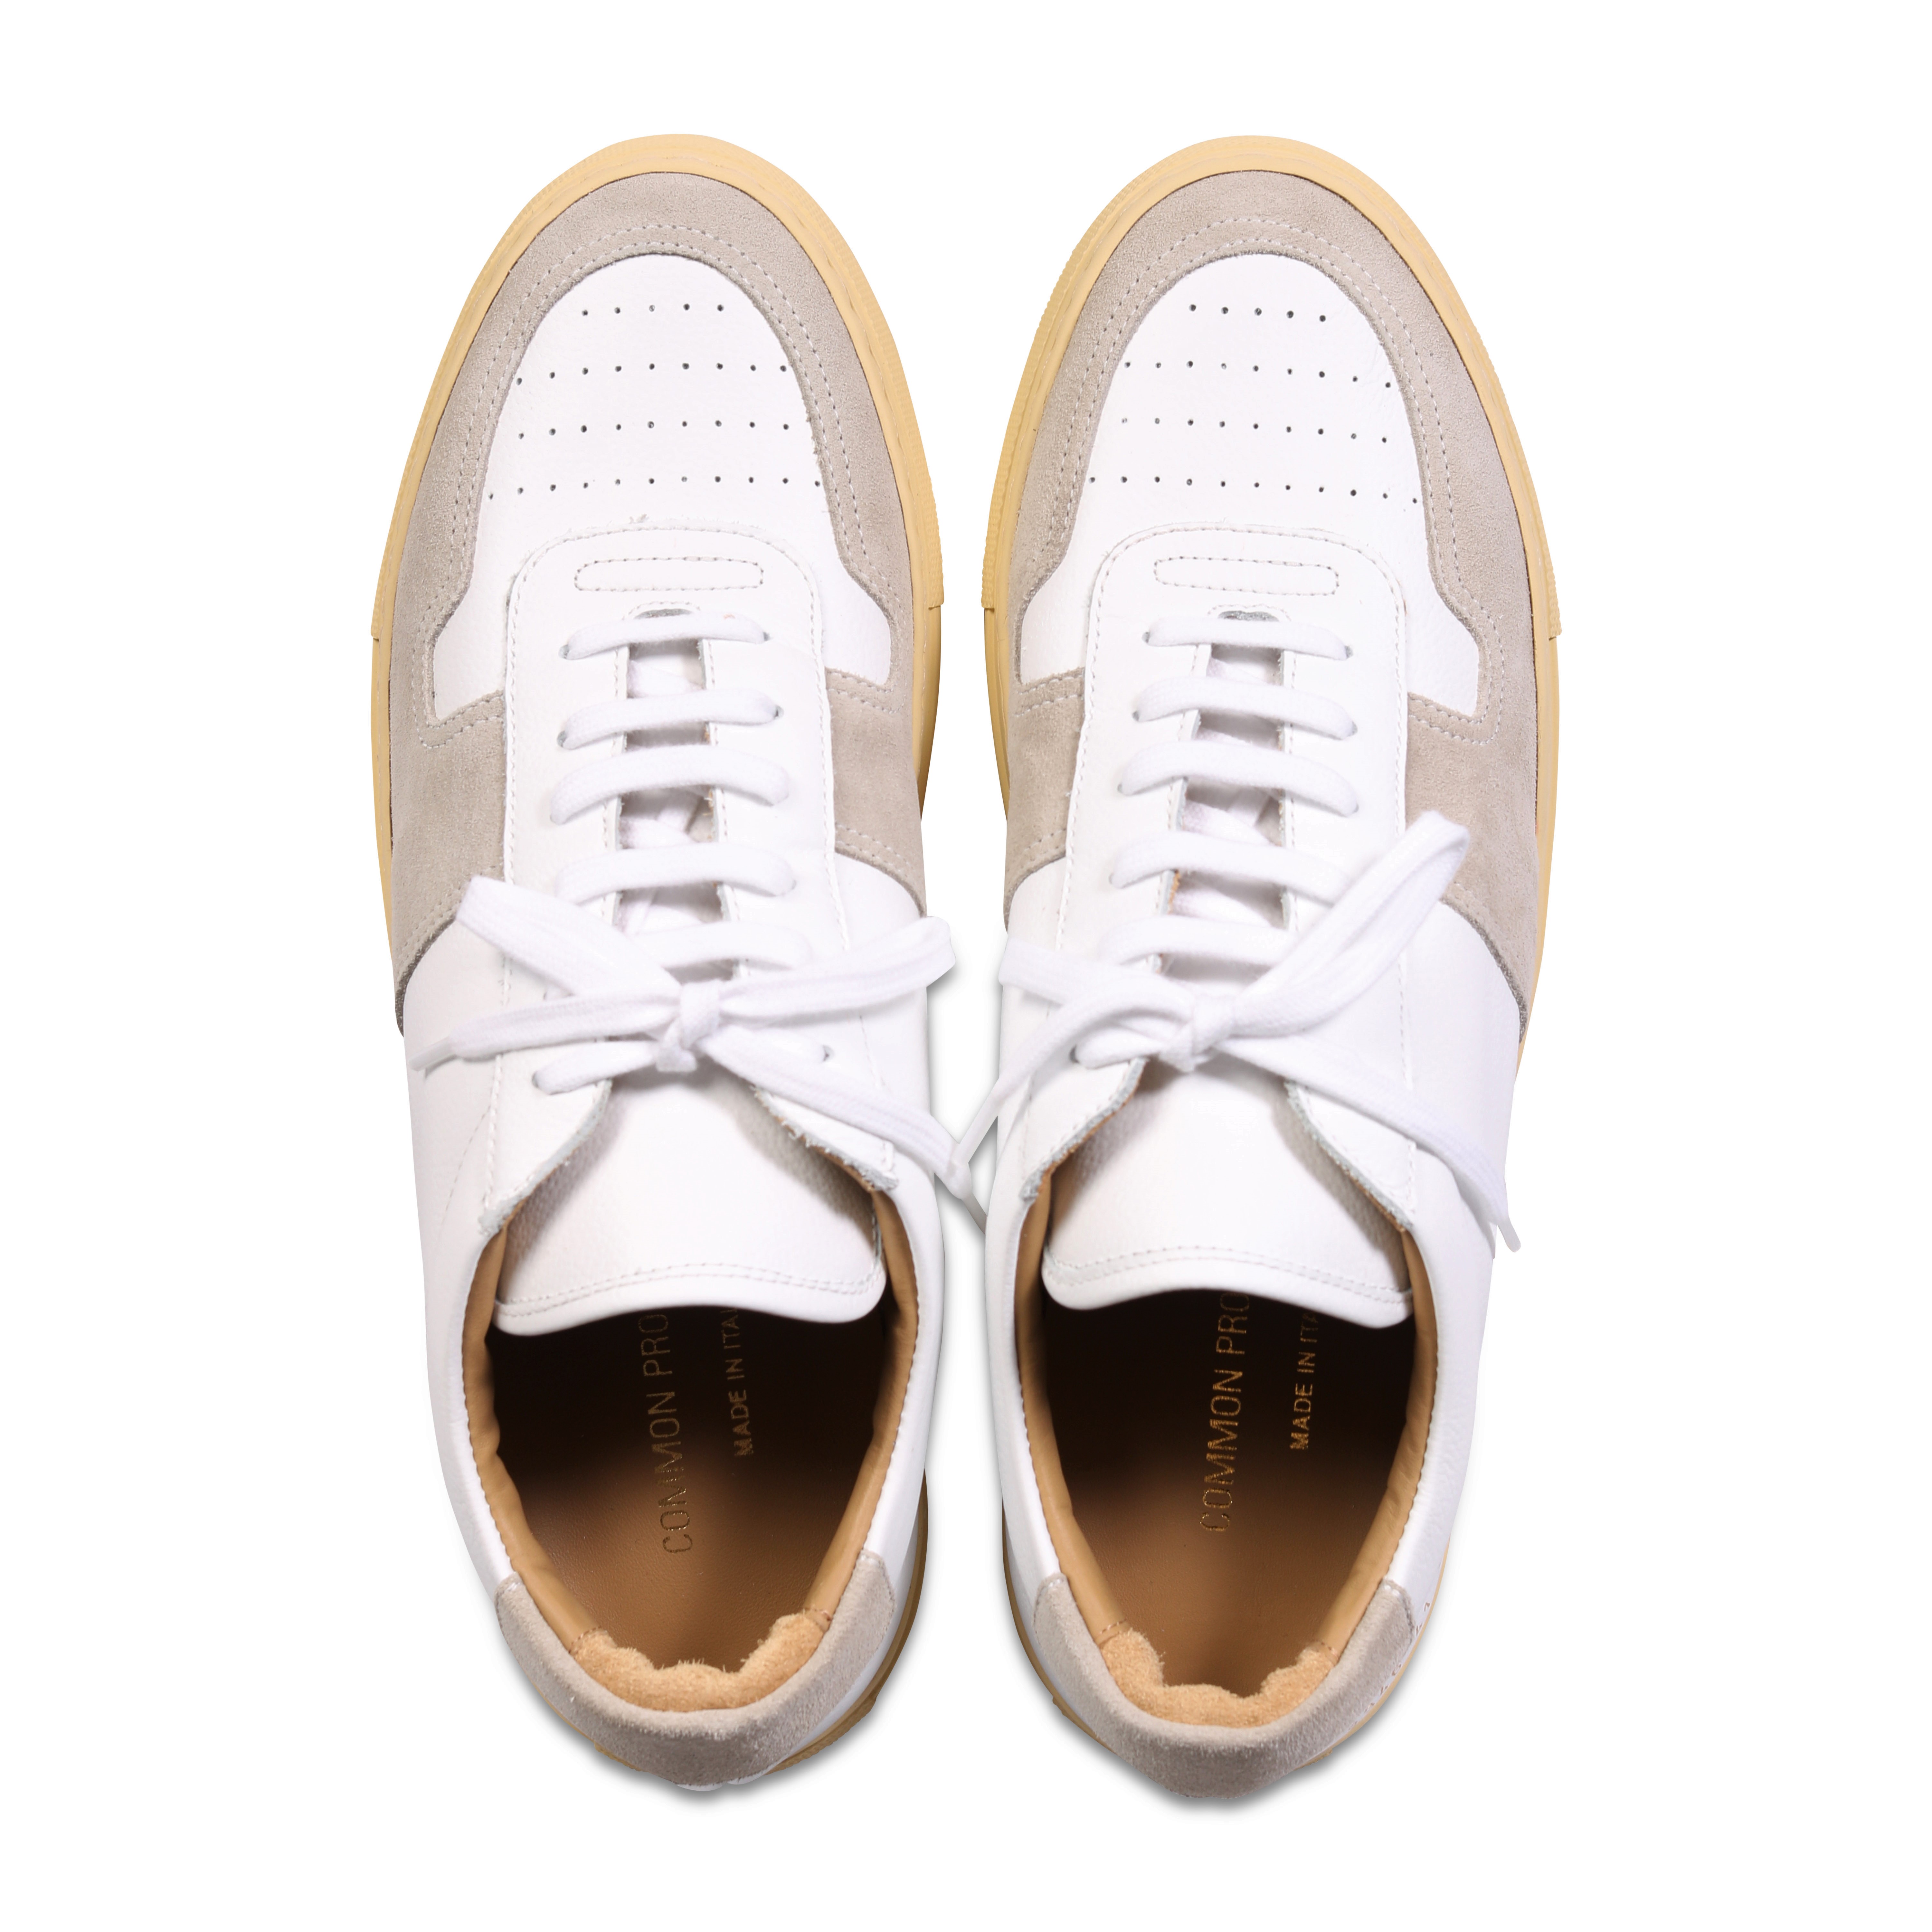 Common Projects Sneaker Bball Low Multi 40